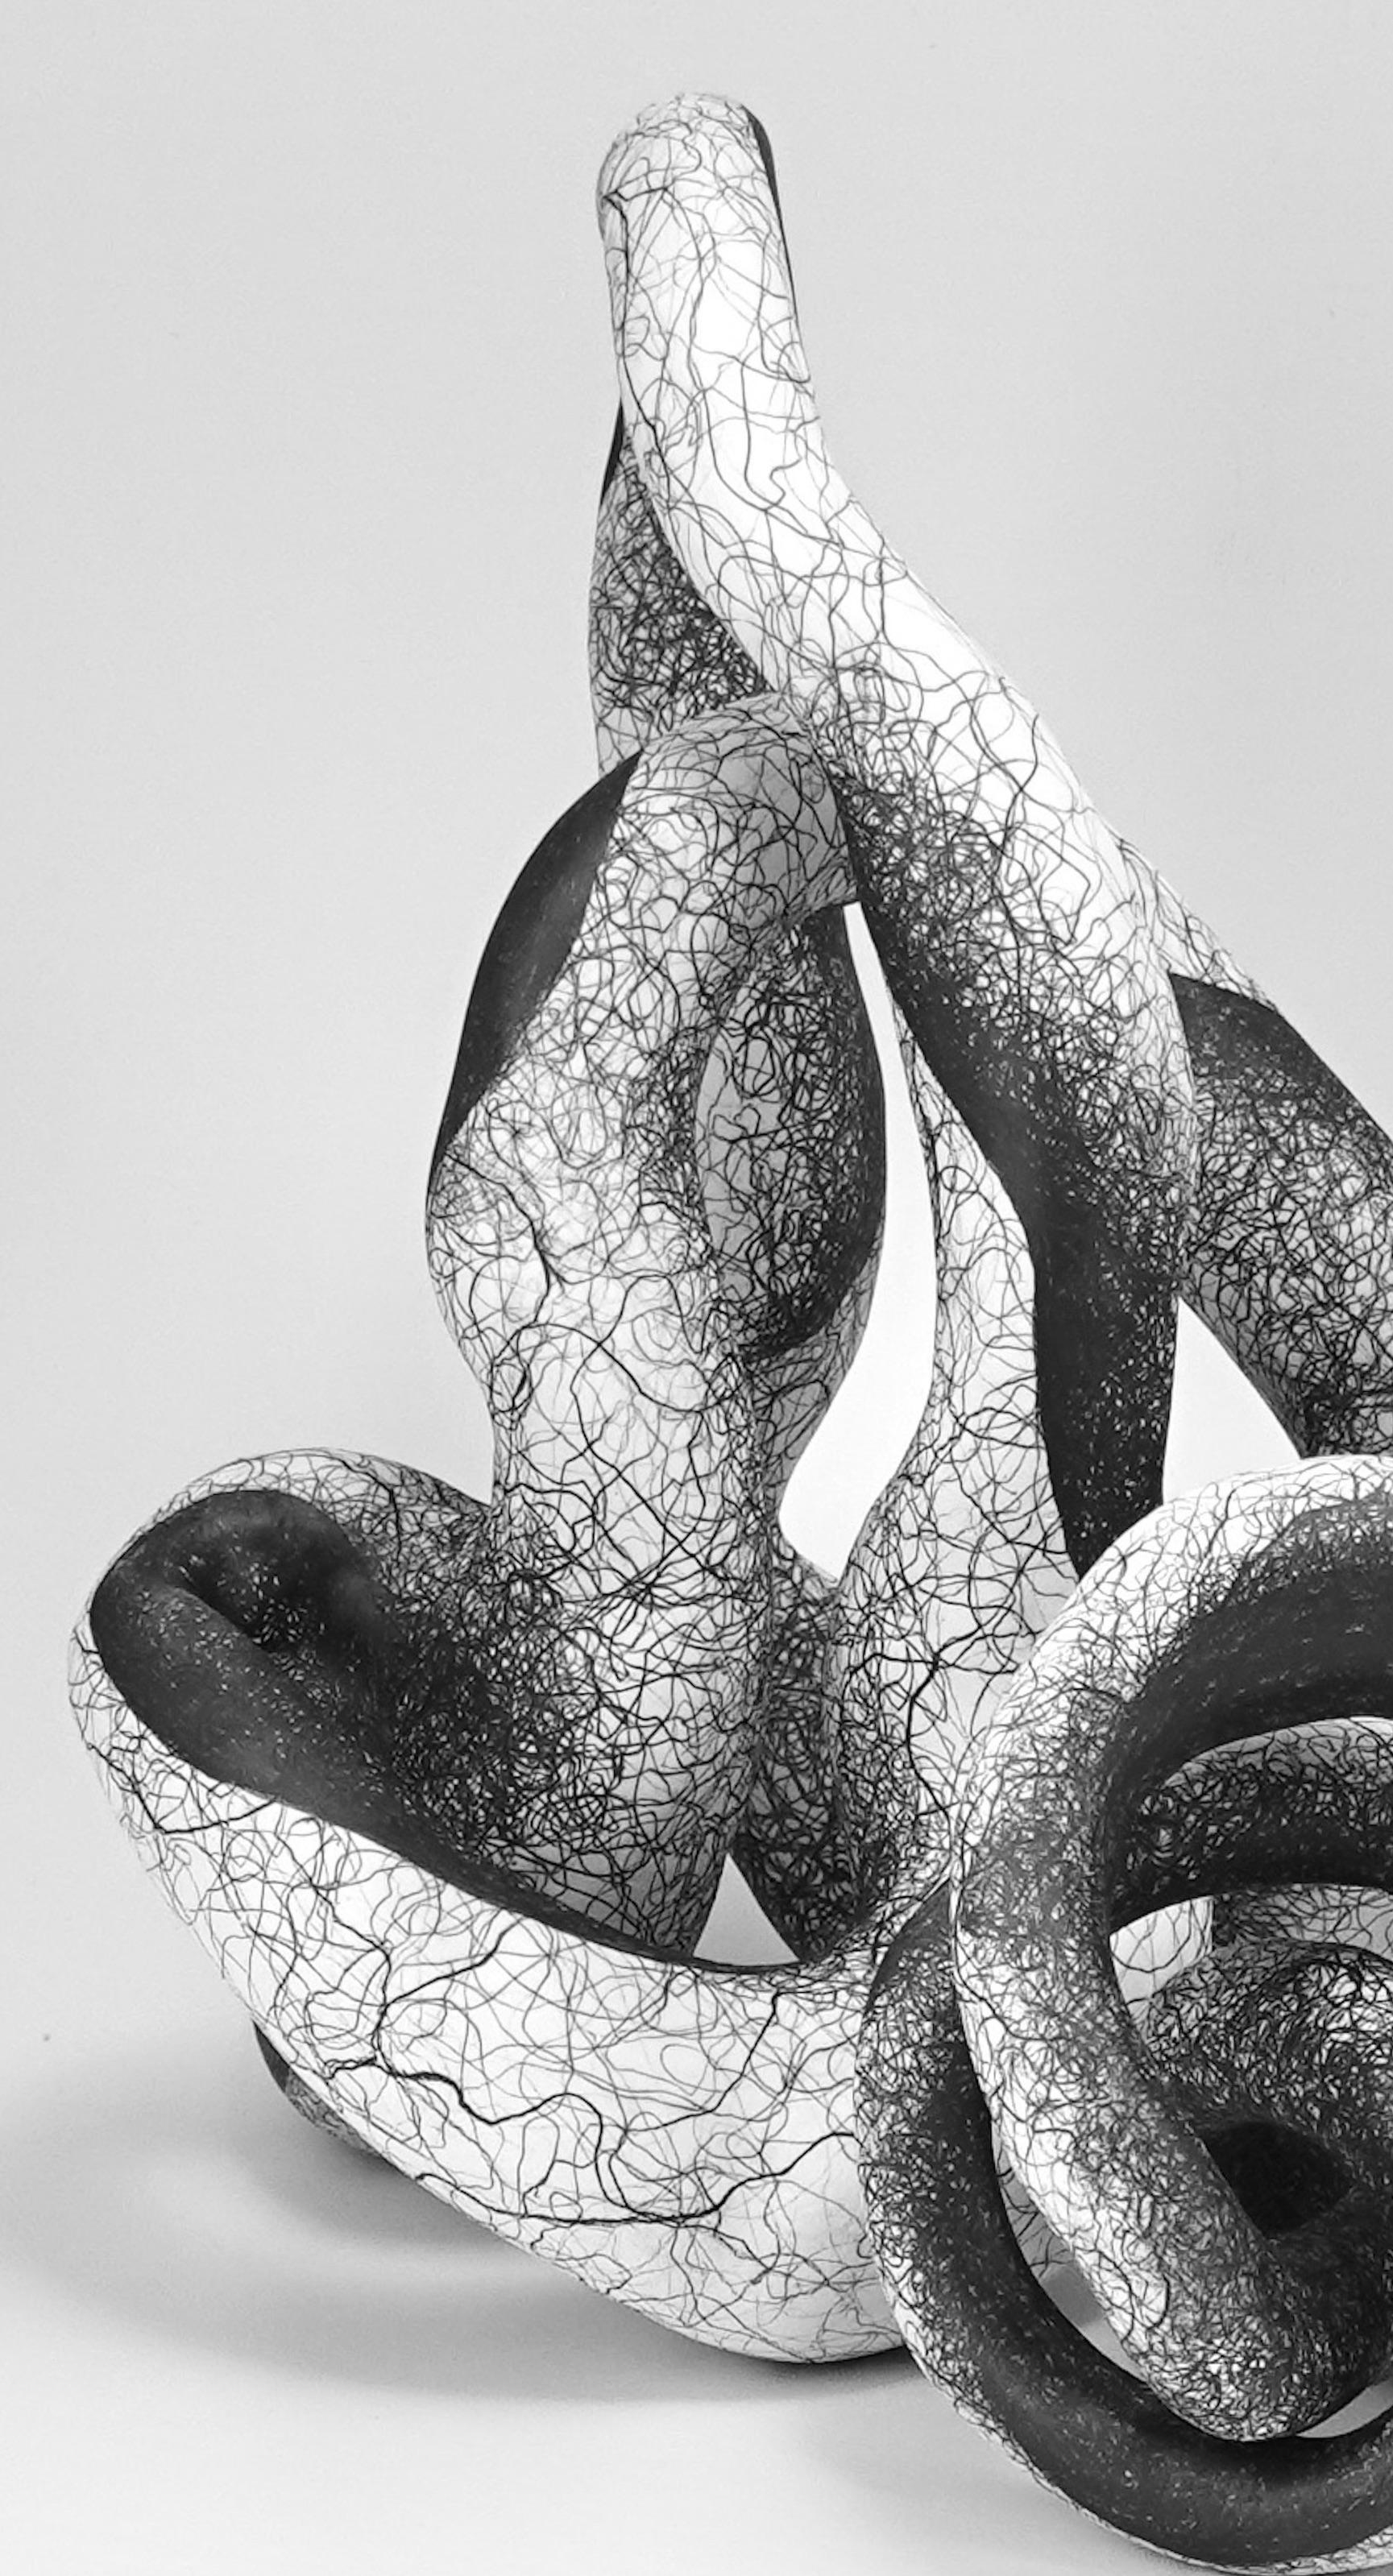 Judi Tavill( NJ) creates biomorphic abstraction coupling sculpture with drawing that references the complicated experience of connection and entanglement.
After receiving her BFA from Washington University in Saint Louis, Tavill began her creative